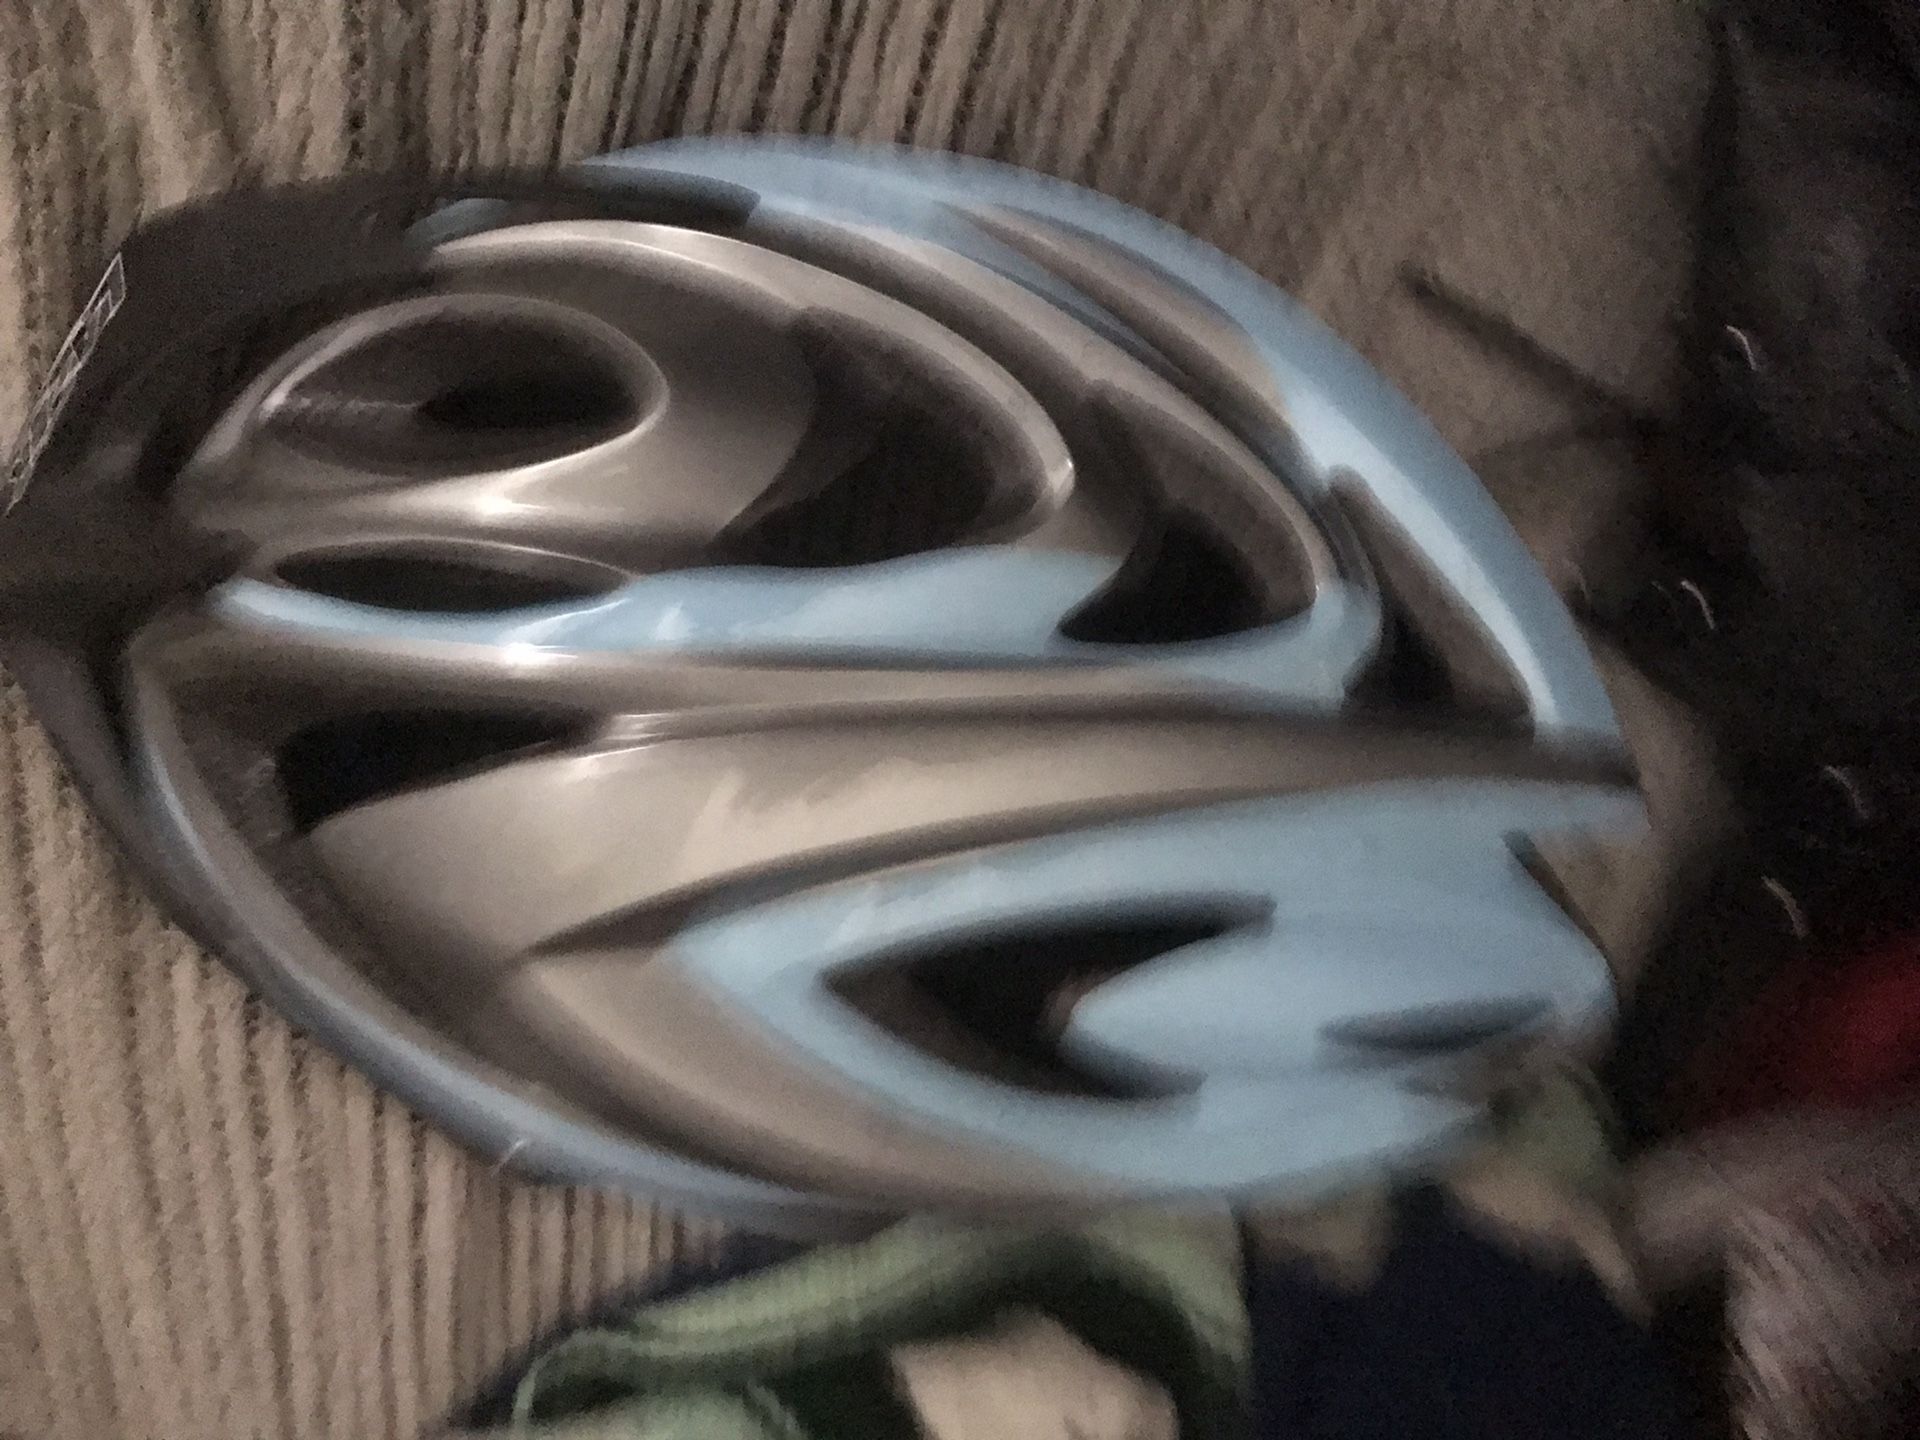 Lnew Large To Medium Bicycling Helmet Only $20